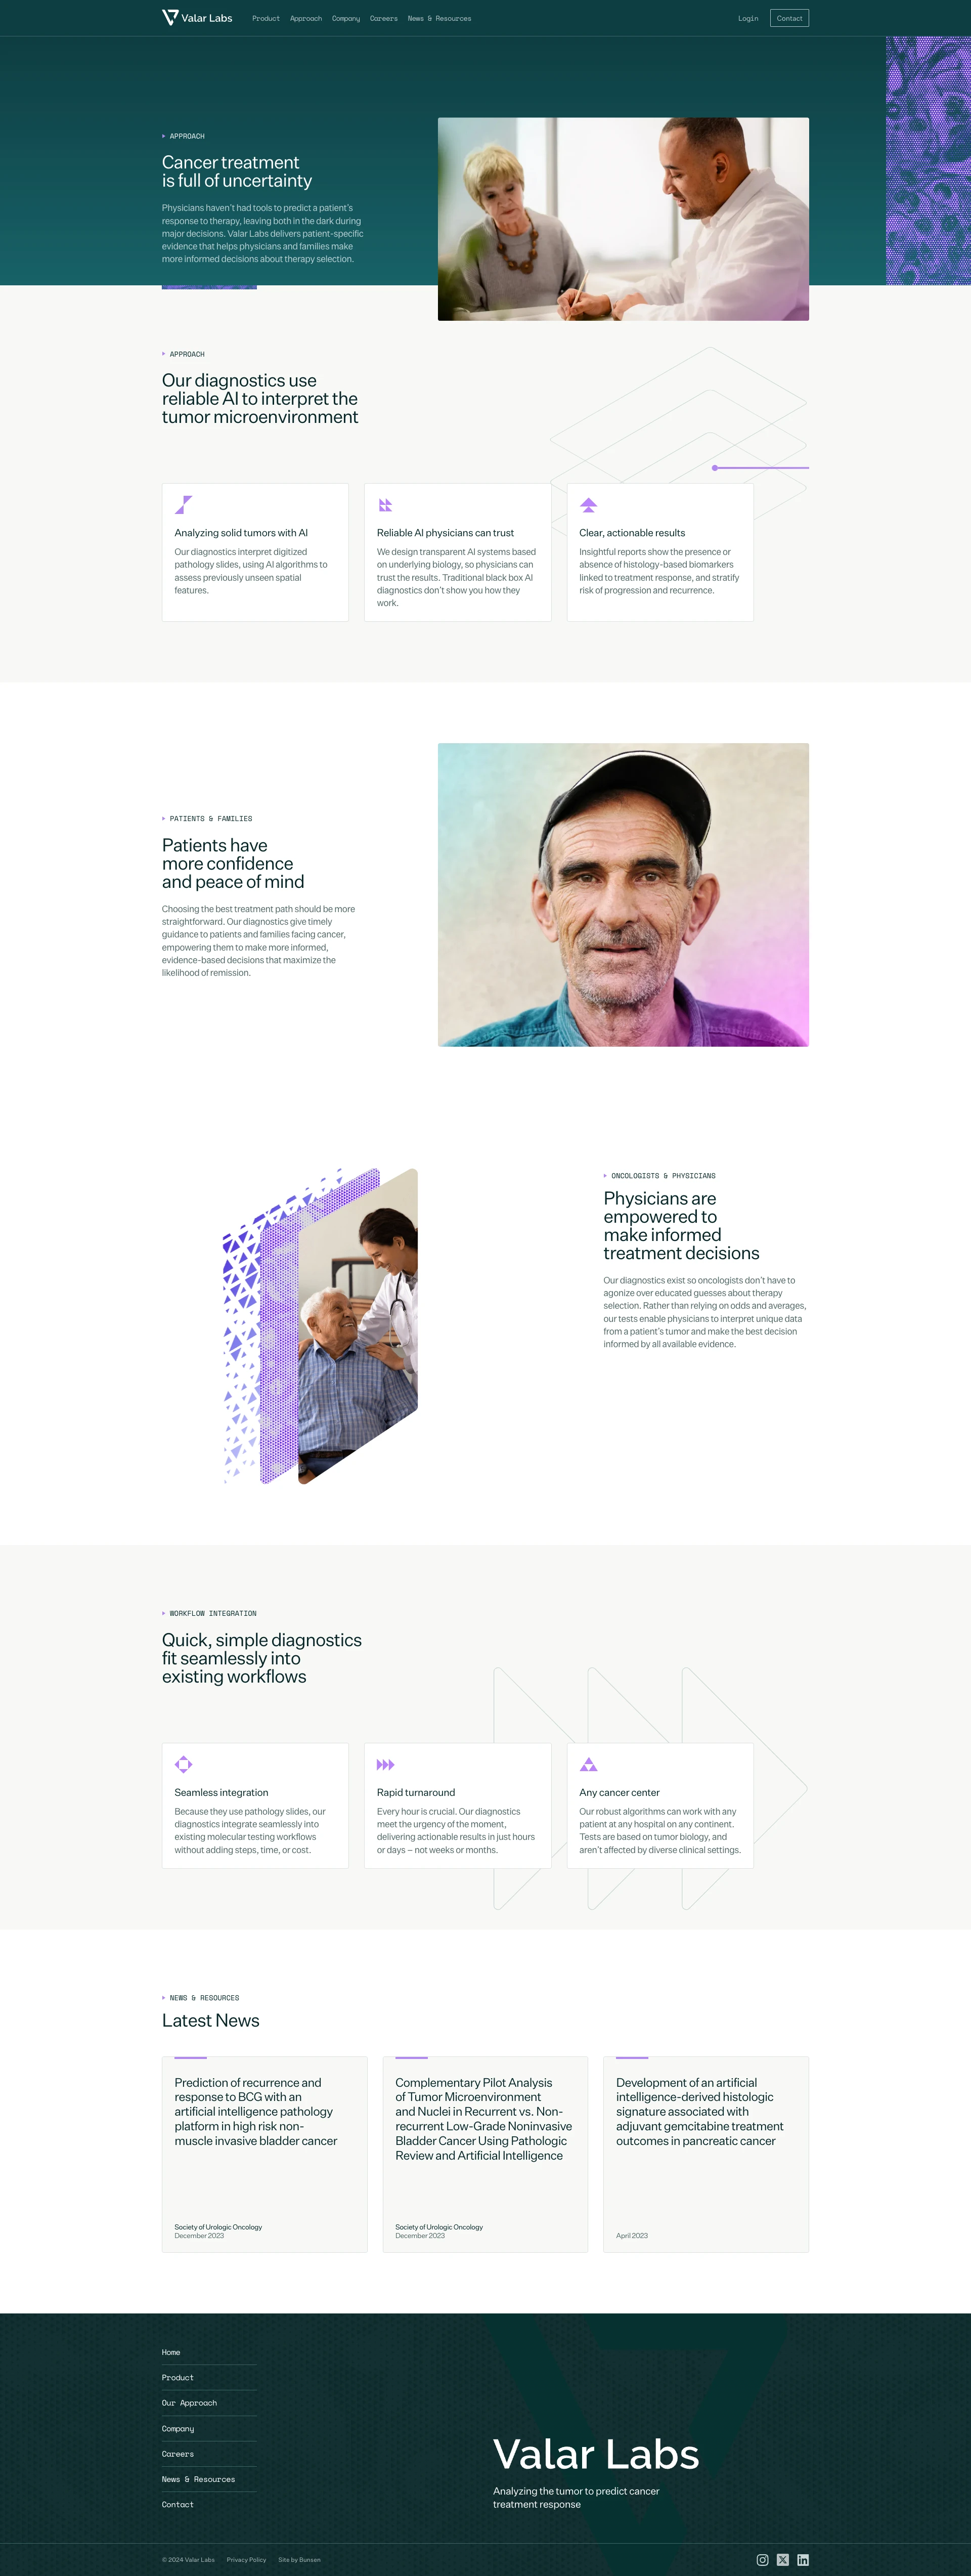 Valarlabs Landing Page Example: Valar Labs makes diagnostics that use AI to interpret solid tumors and deliver insights, so physicians and patients can make informed treatment decisions.